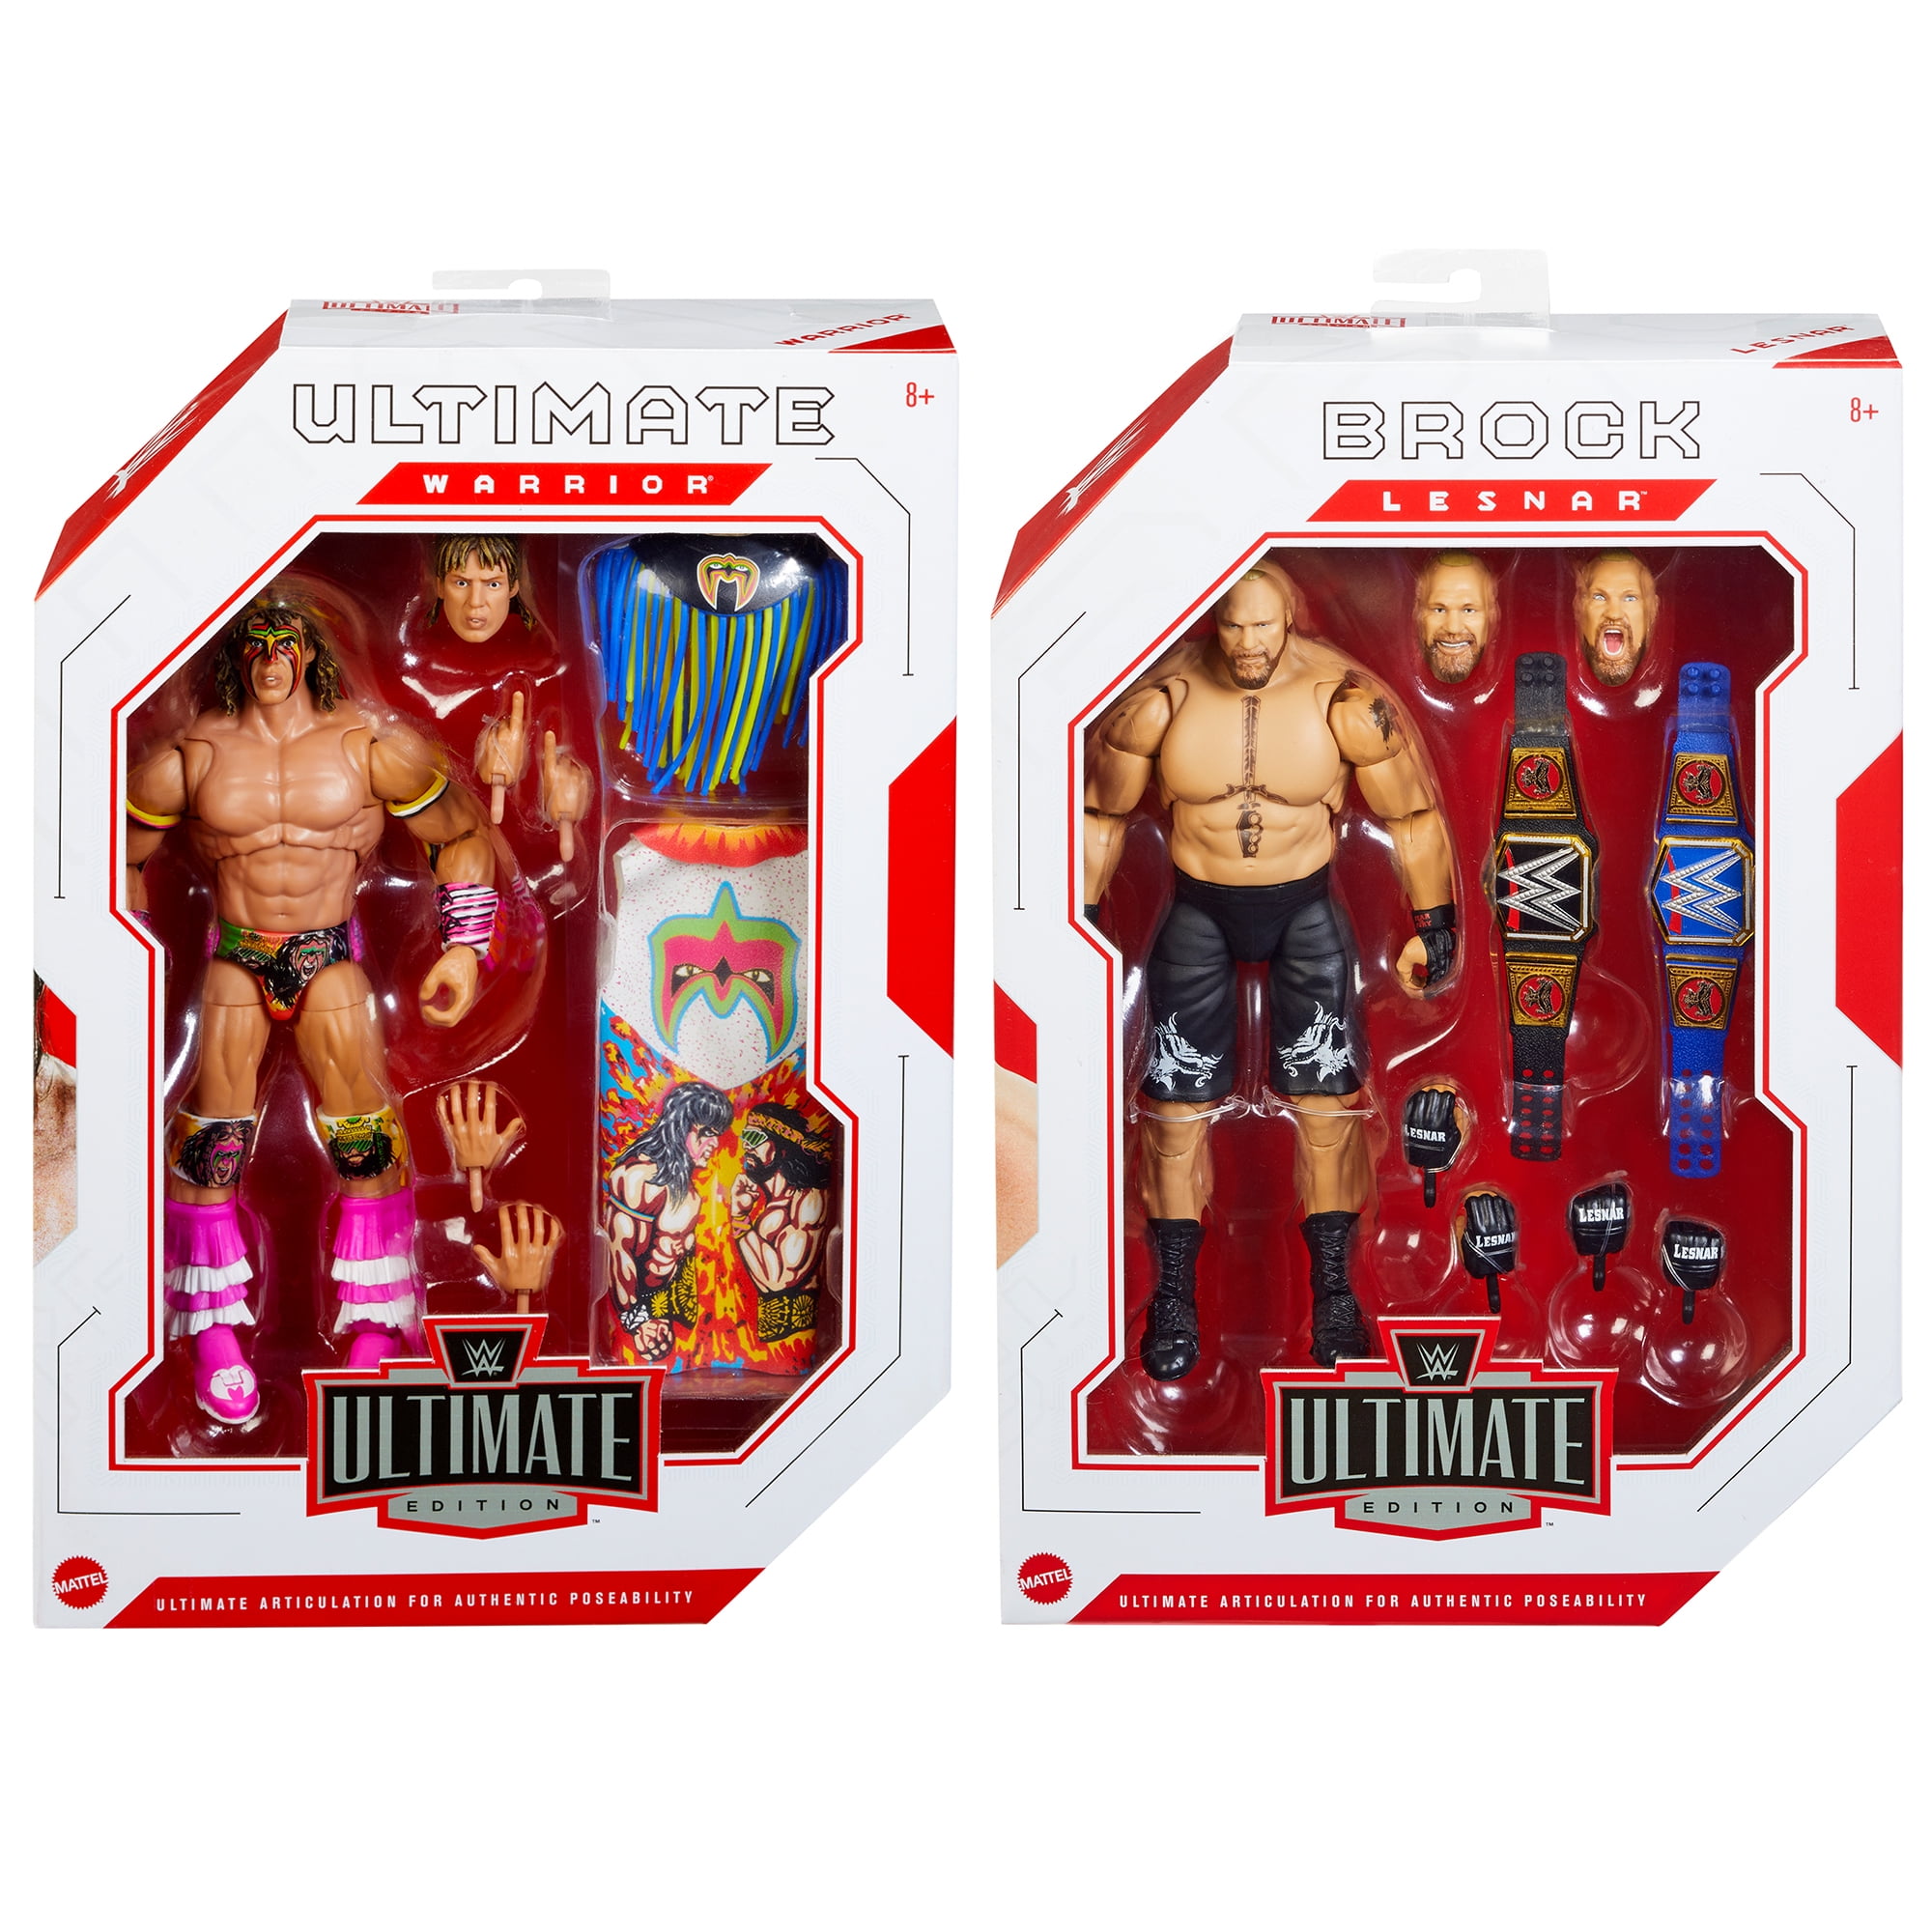 Wwe Ultimate Edition 15 Complete Set Of 2 Mattel Wwe Toy Wrestling Action Figures